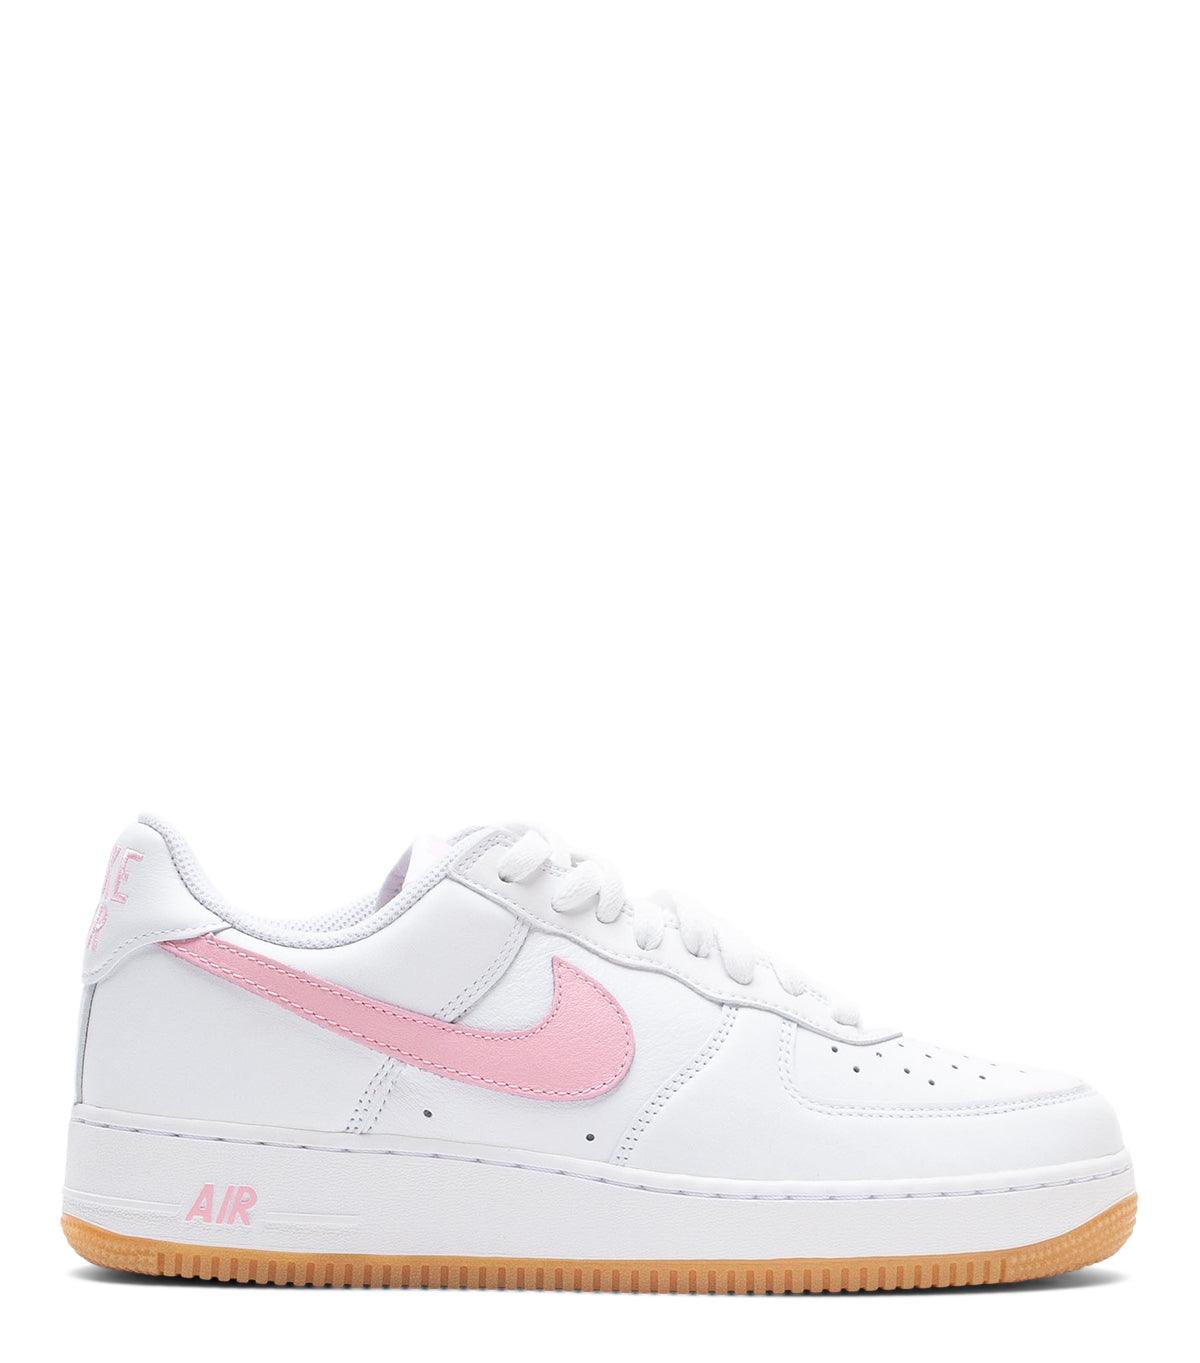 10.06.22 Nike Air Force 1 Low Retro White Pink 